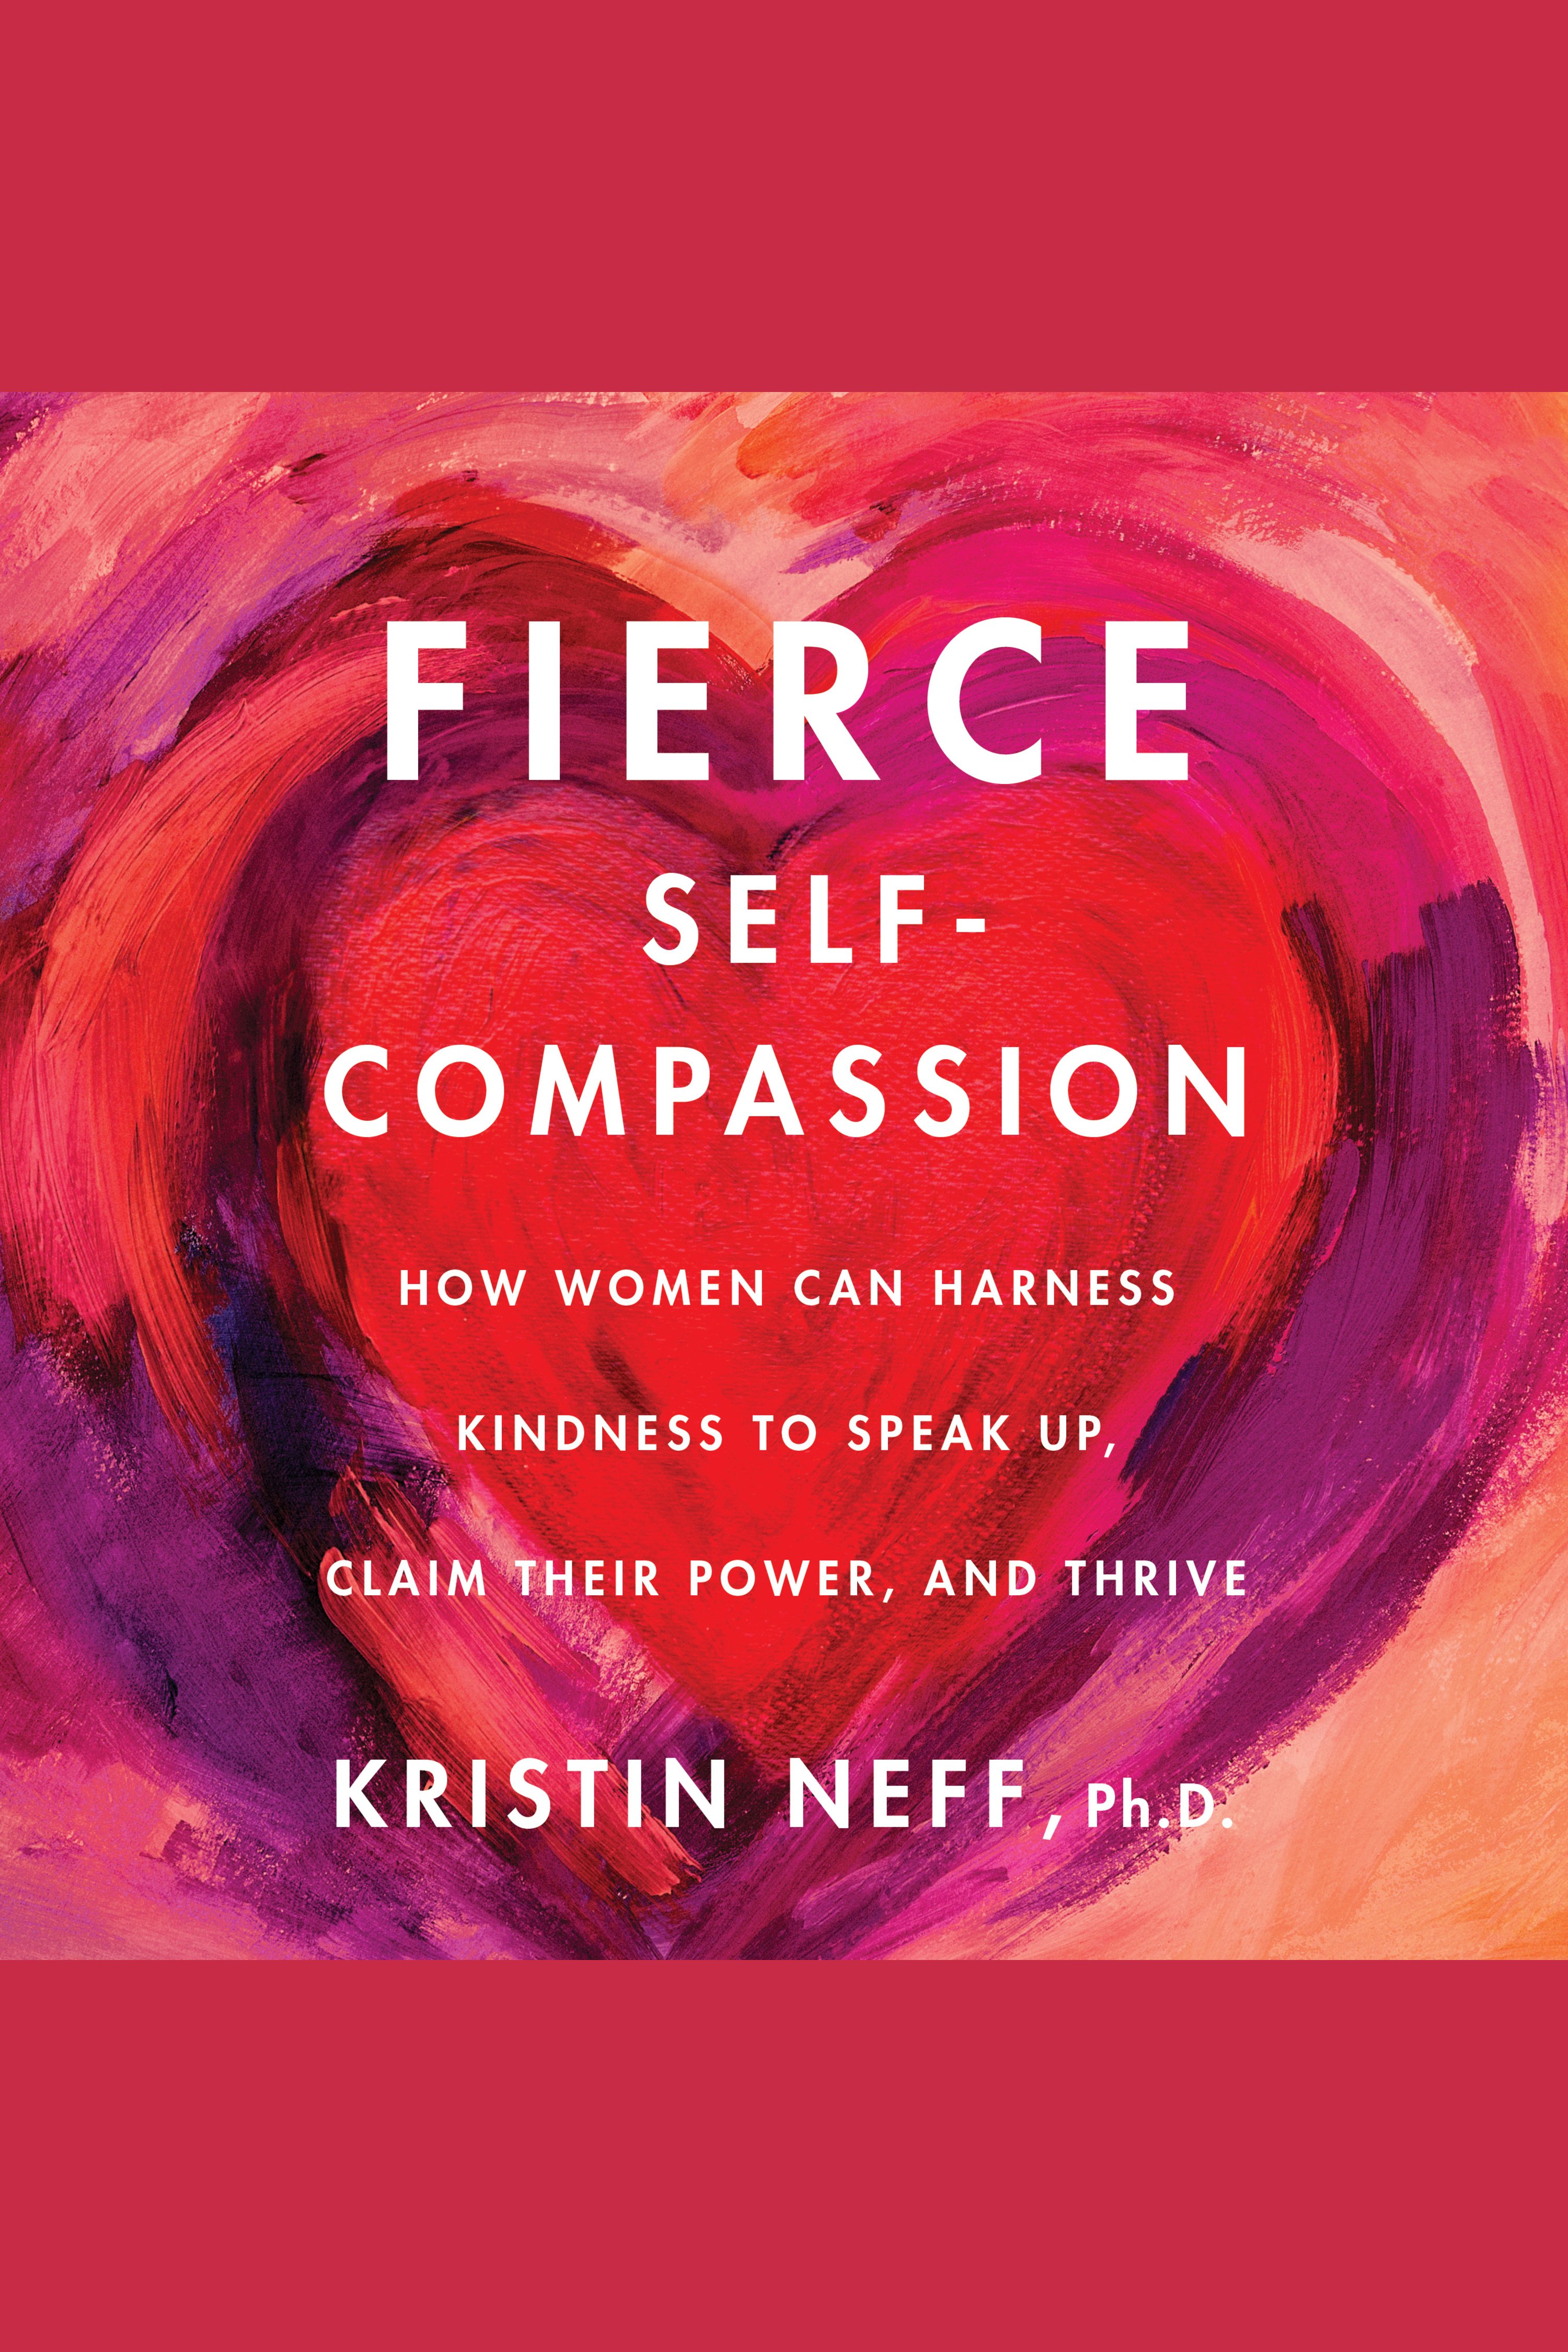 Fierce Self-Compassion How Women Can Harness Kindness to Speak Up, Claim Their Power, and Thrive cover image